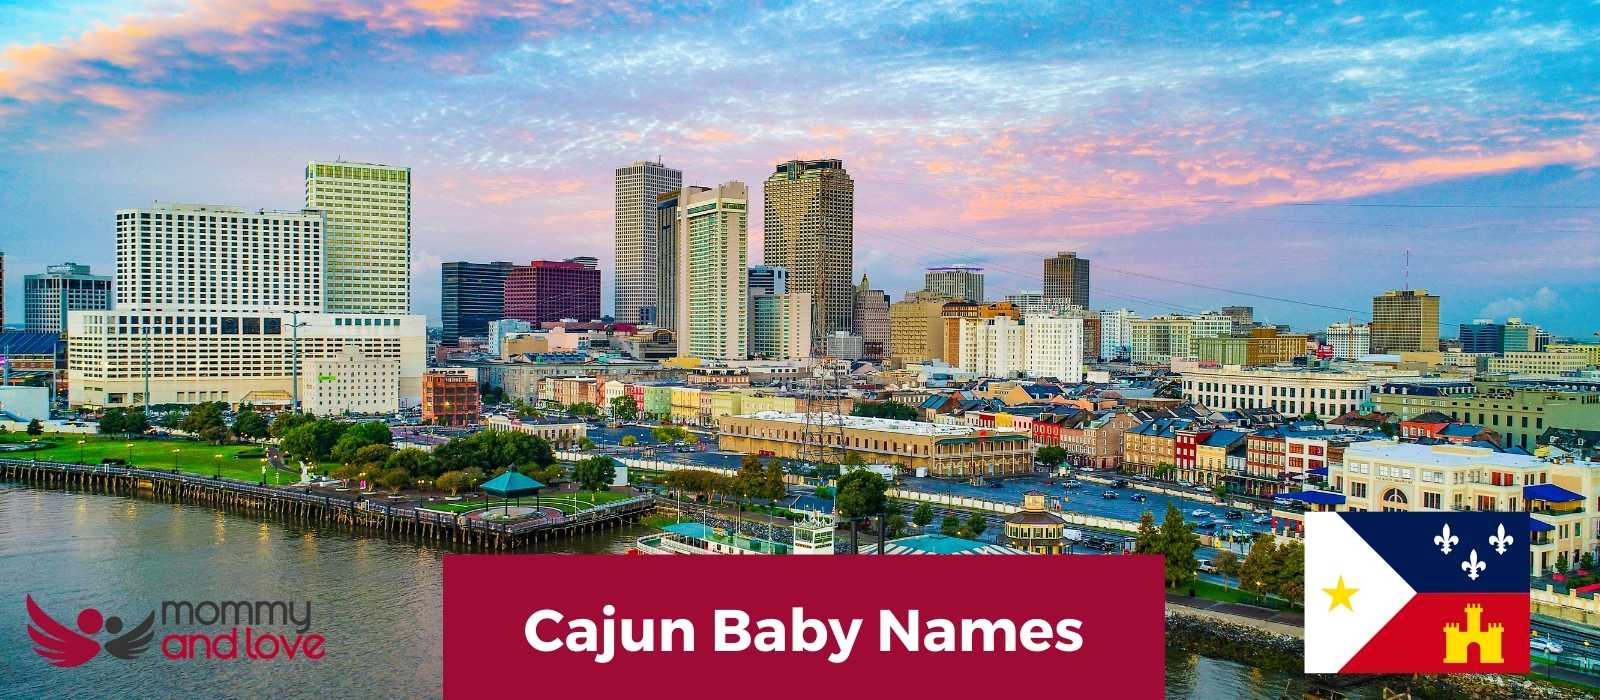 Cajun Baby Names 101 Louisiana-Inspired Names for Your Little One